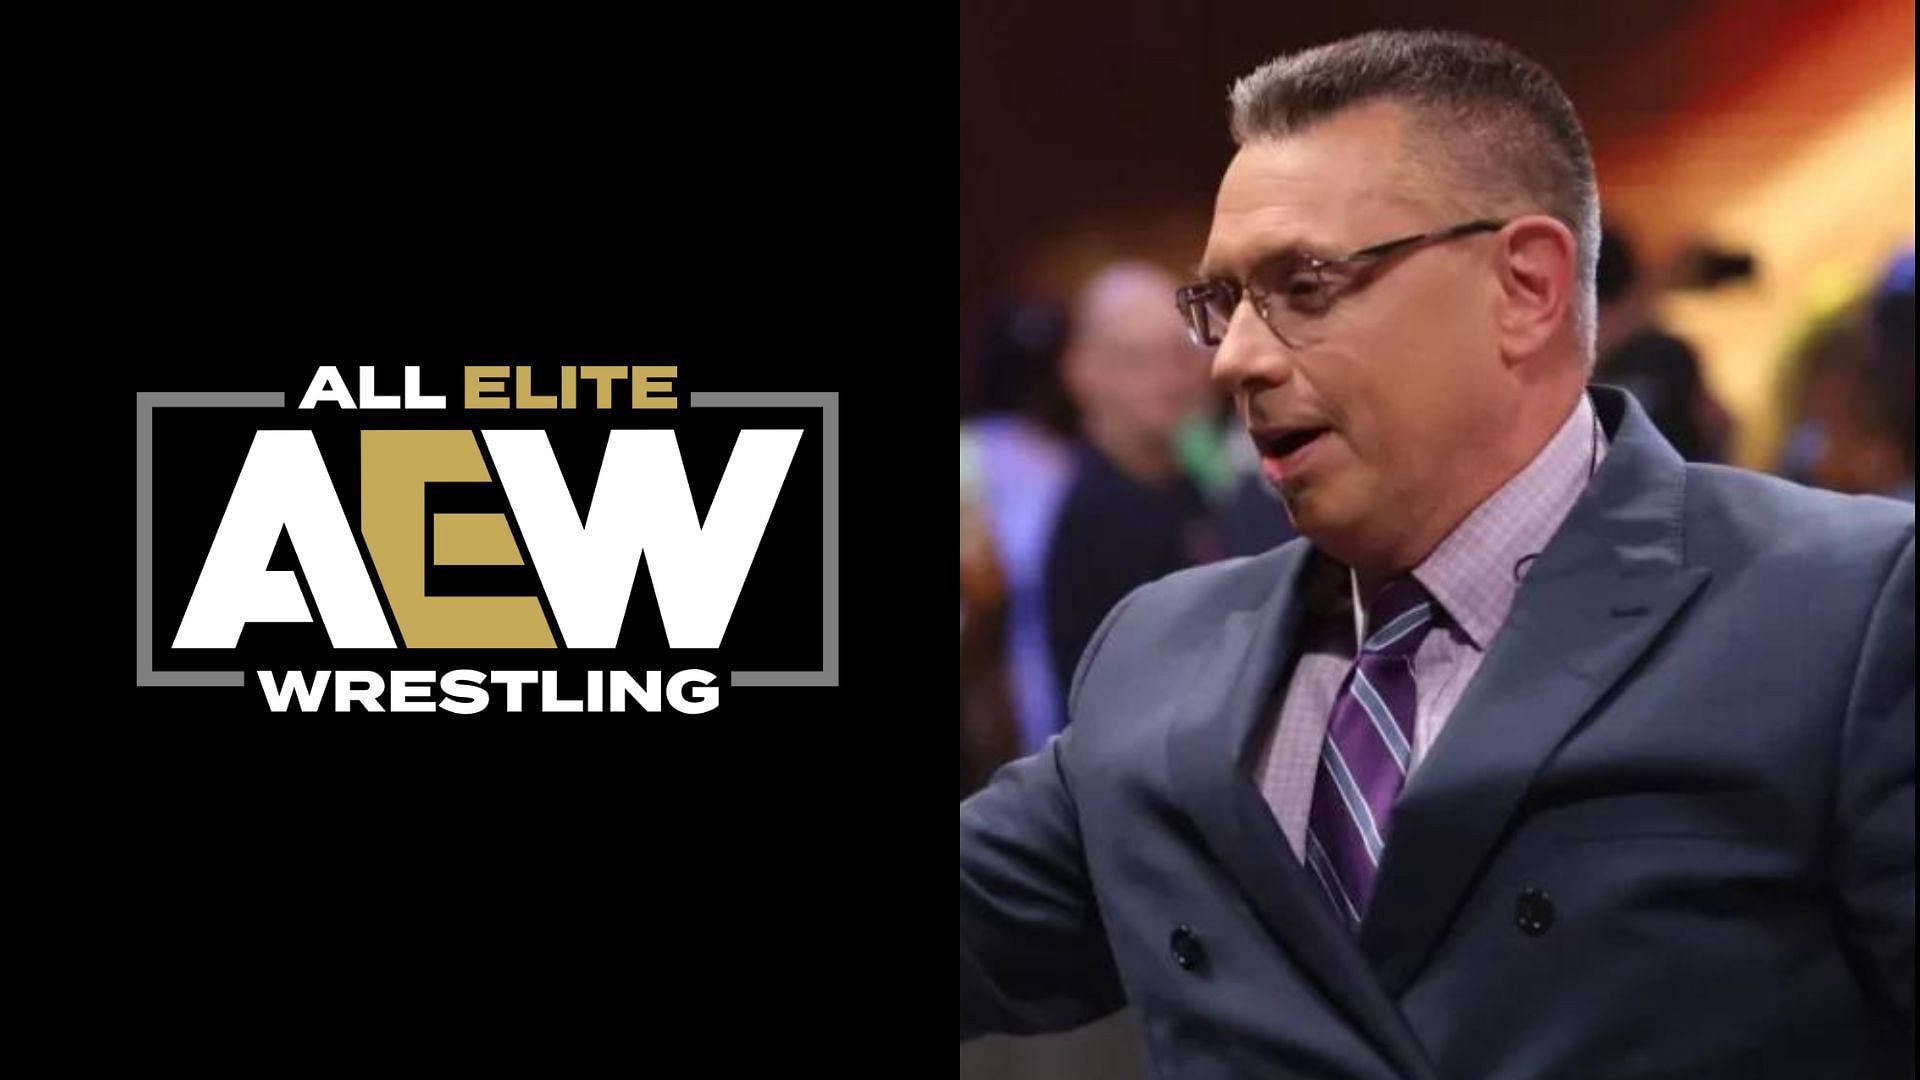 Michael Cole is a long-time WWE Commentator